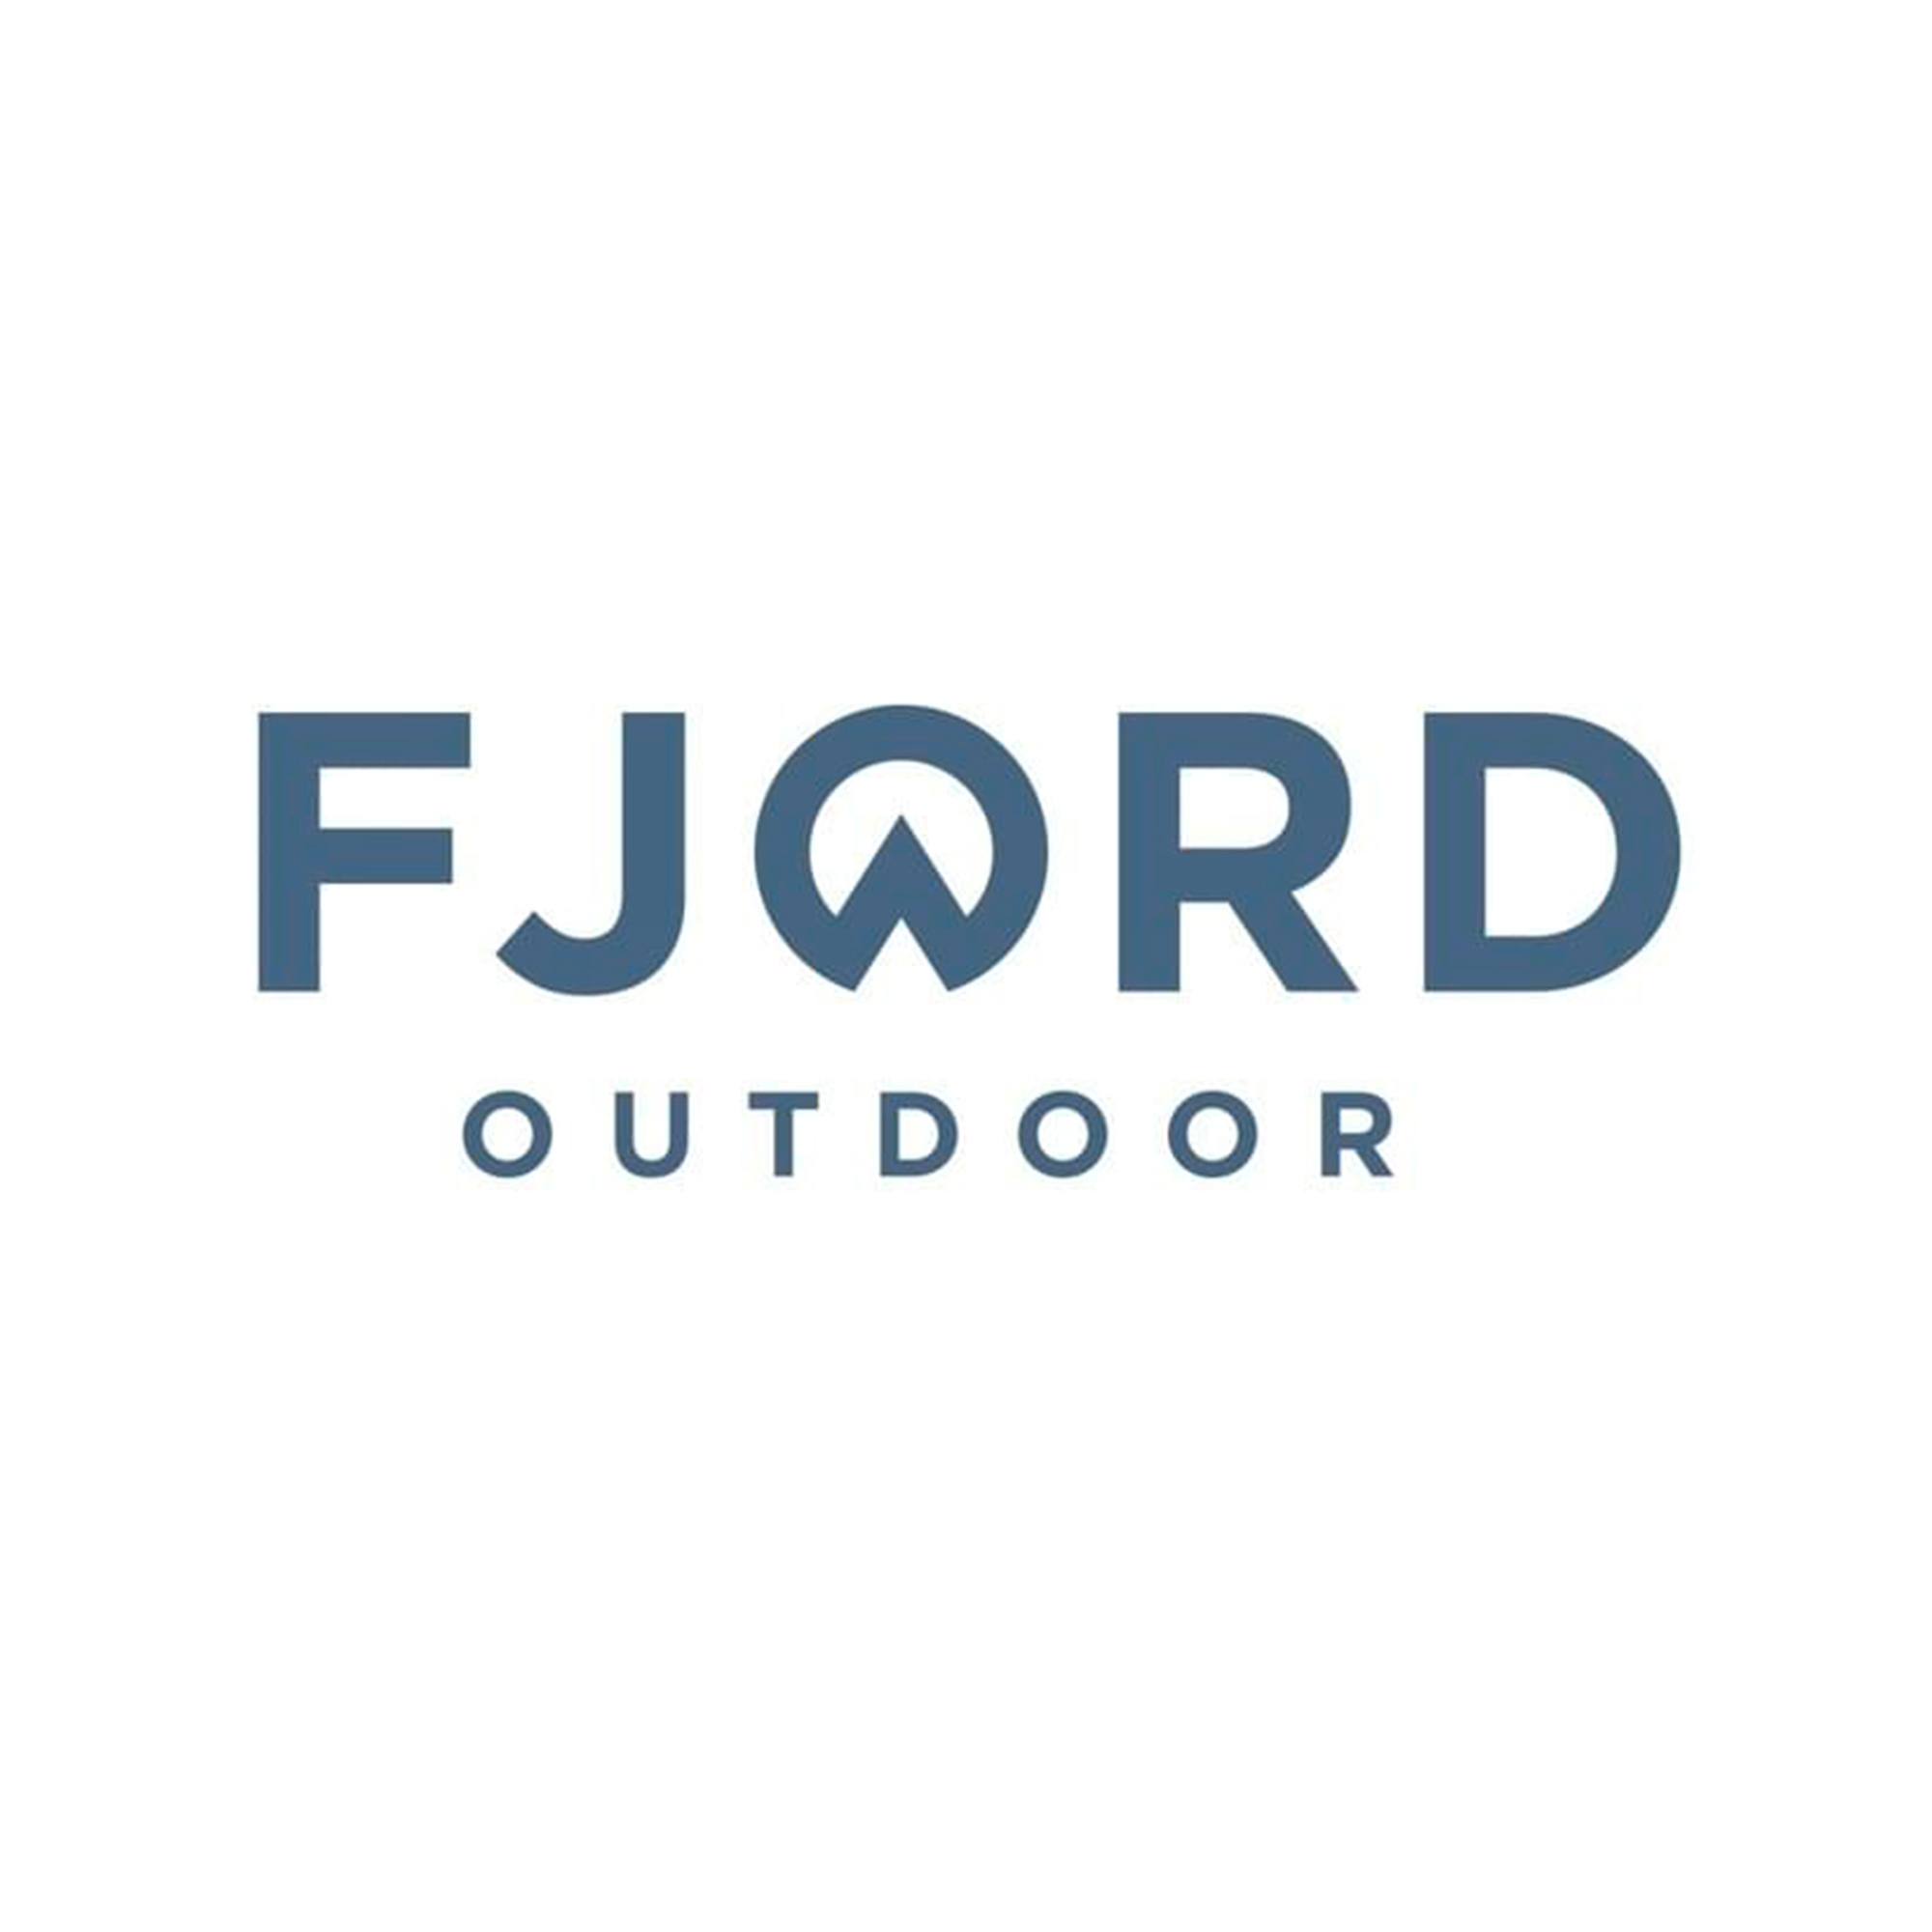 FJORD OUTDOOR